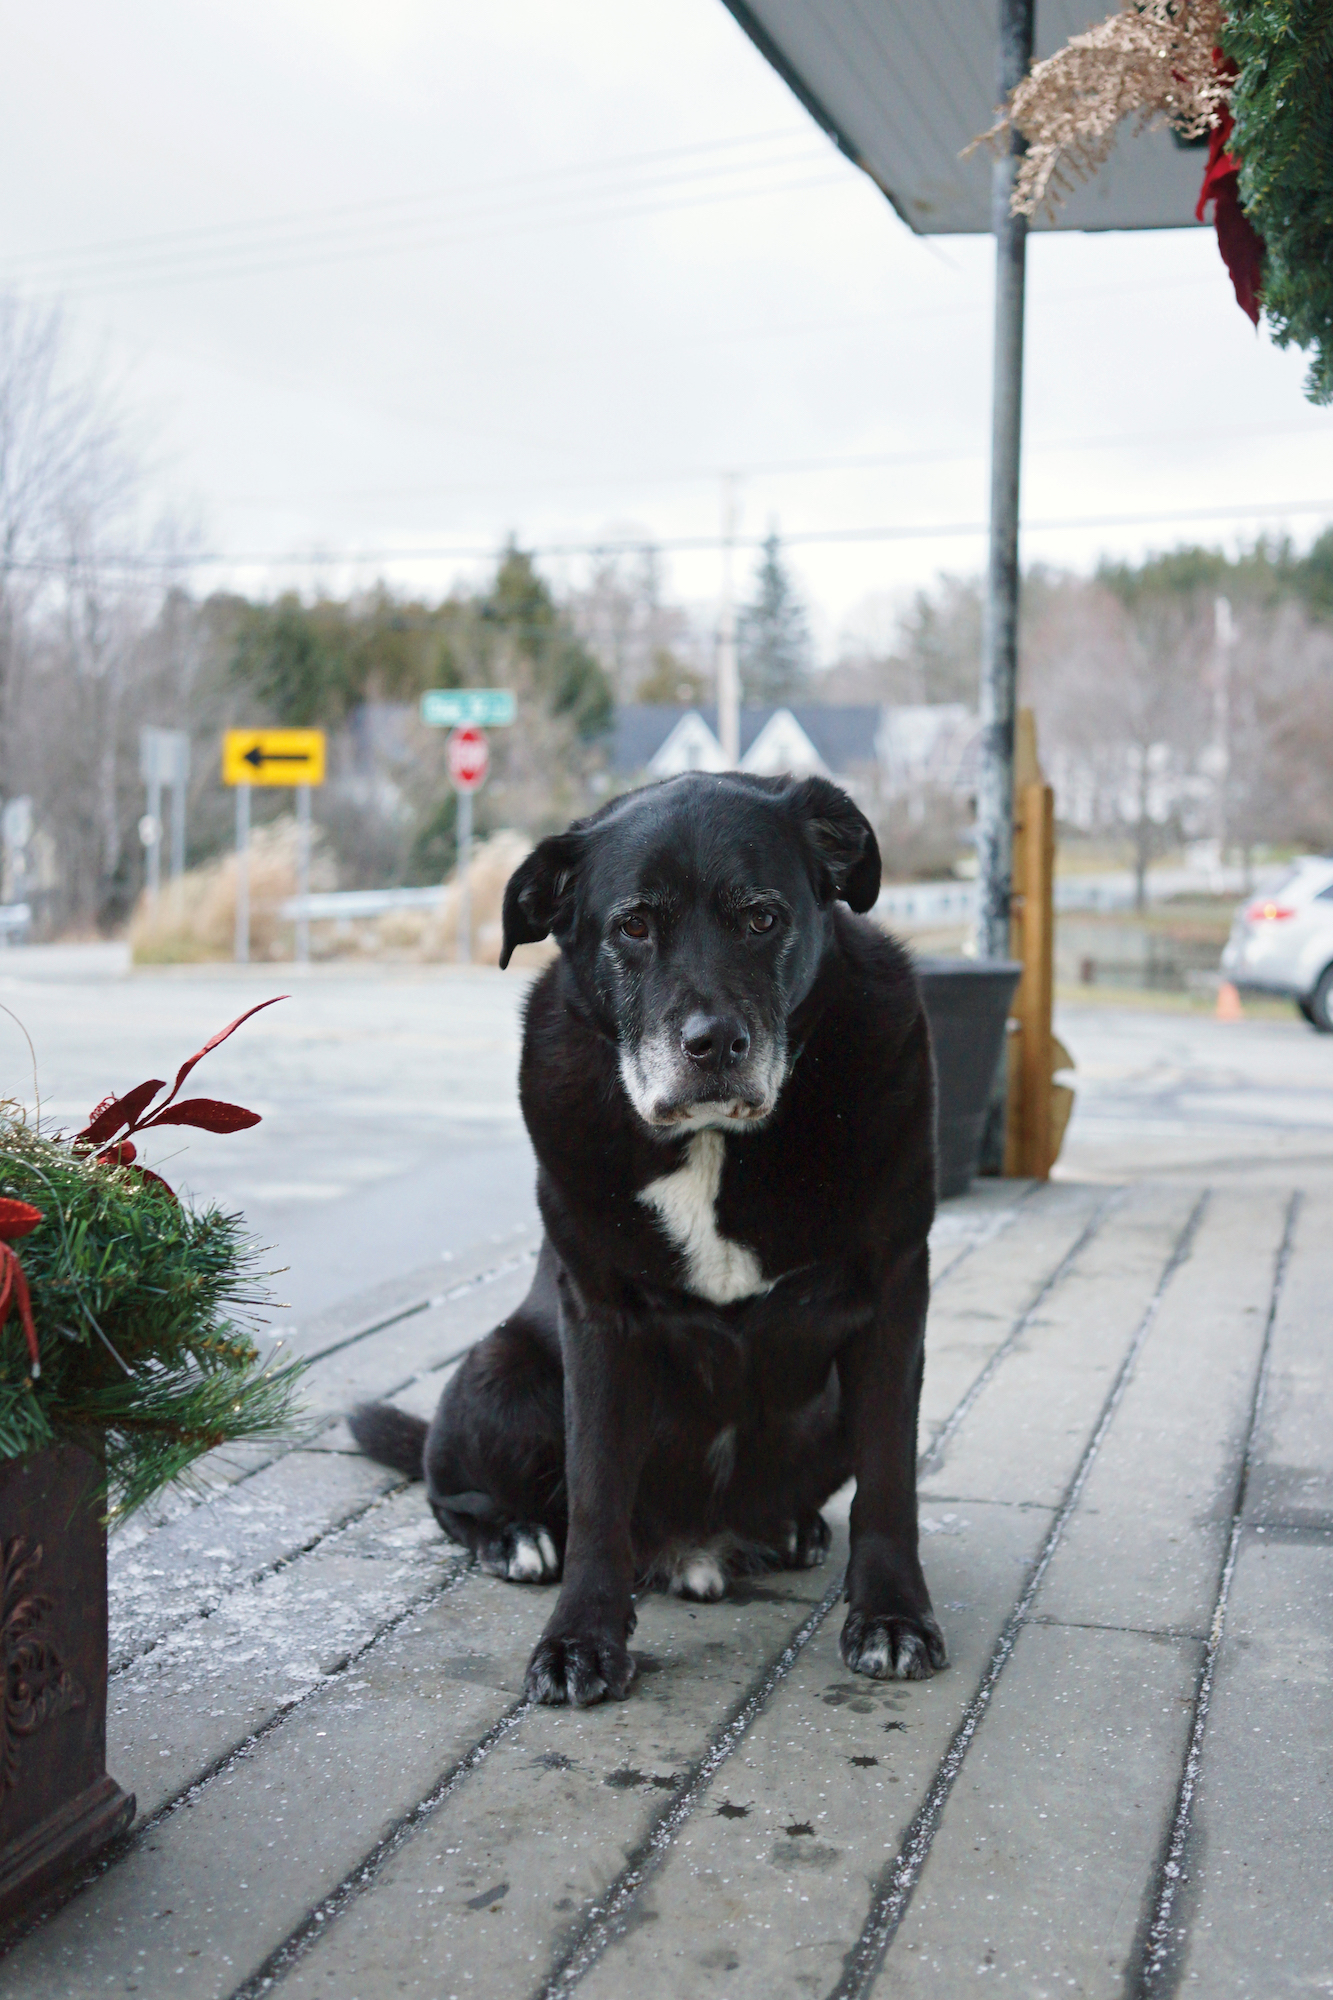 Photo by Tara Wray from her book Too Tired for Sunshine; a dog with black fur sits and stares directly at the viewer